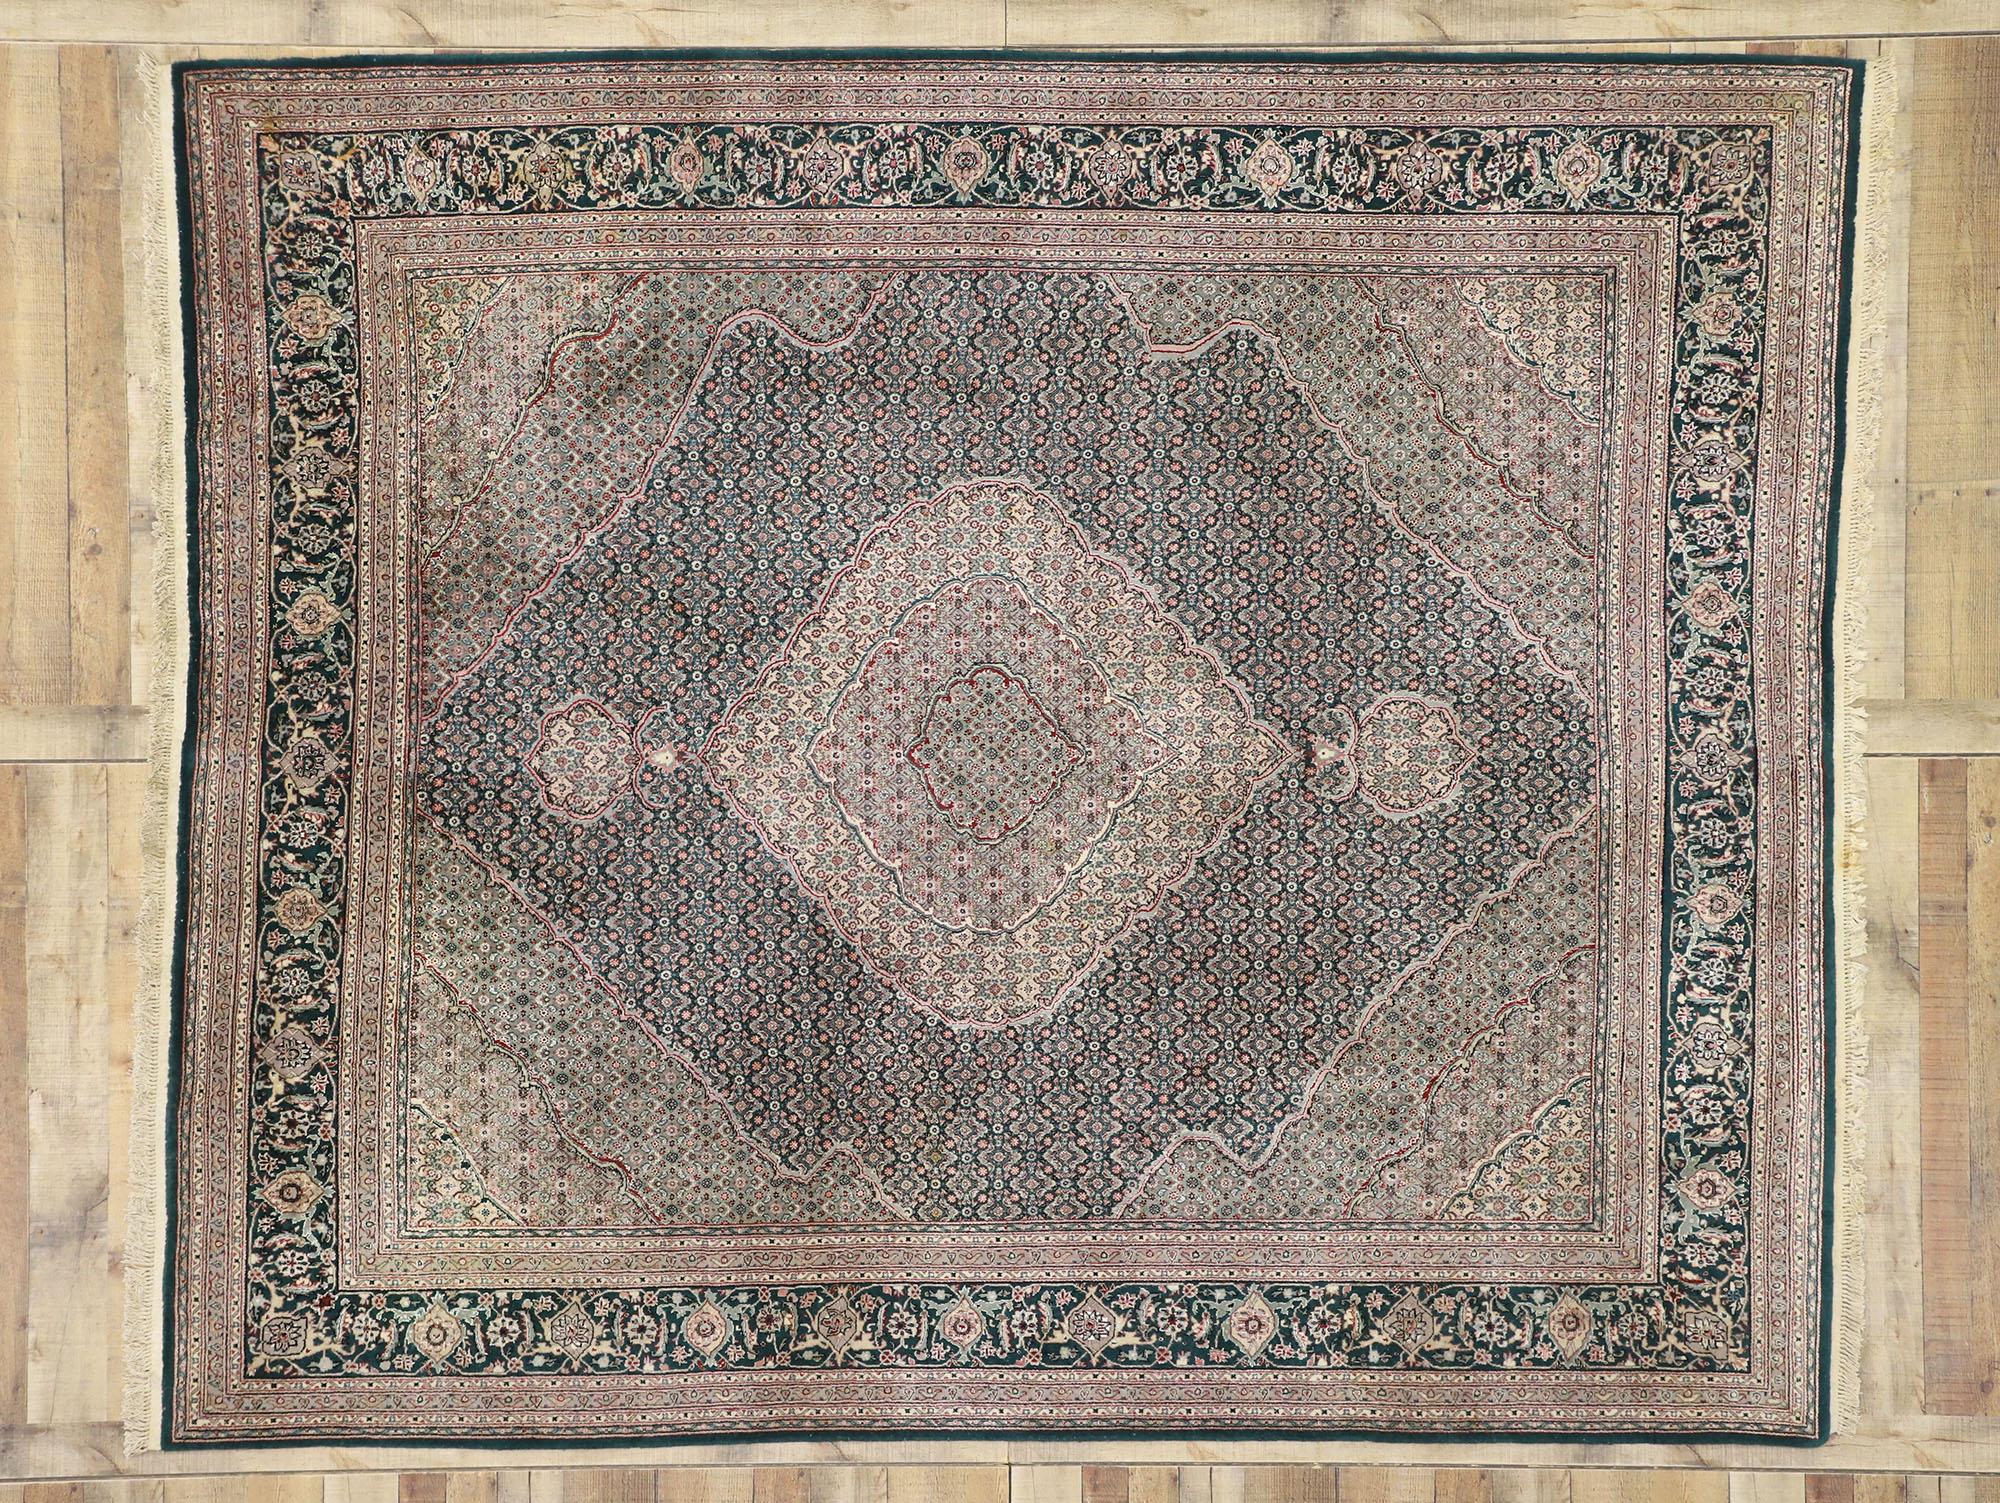 Vintage Chinese Persian Tabriz Rug with Mahi Fish Design and Old World Style In Good Condition For Sale In Dallas, TX